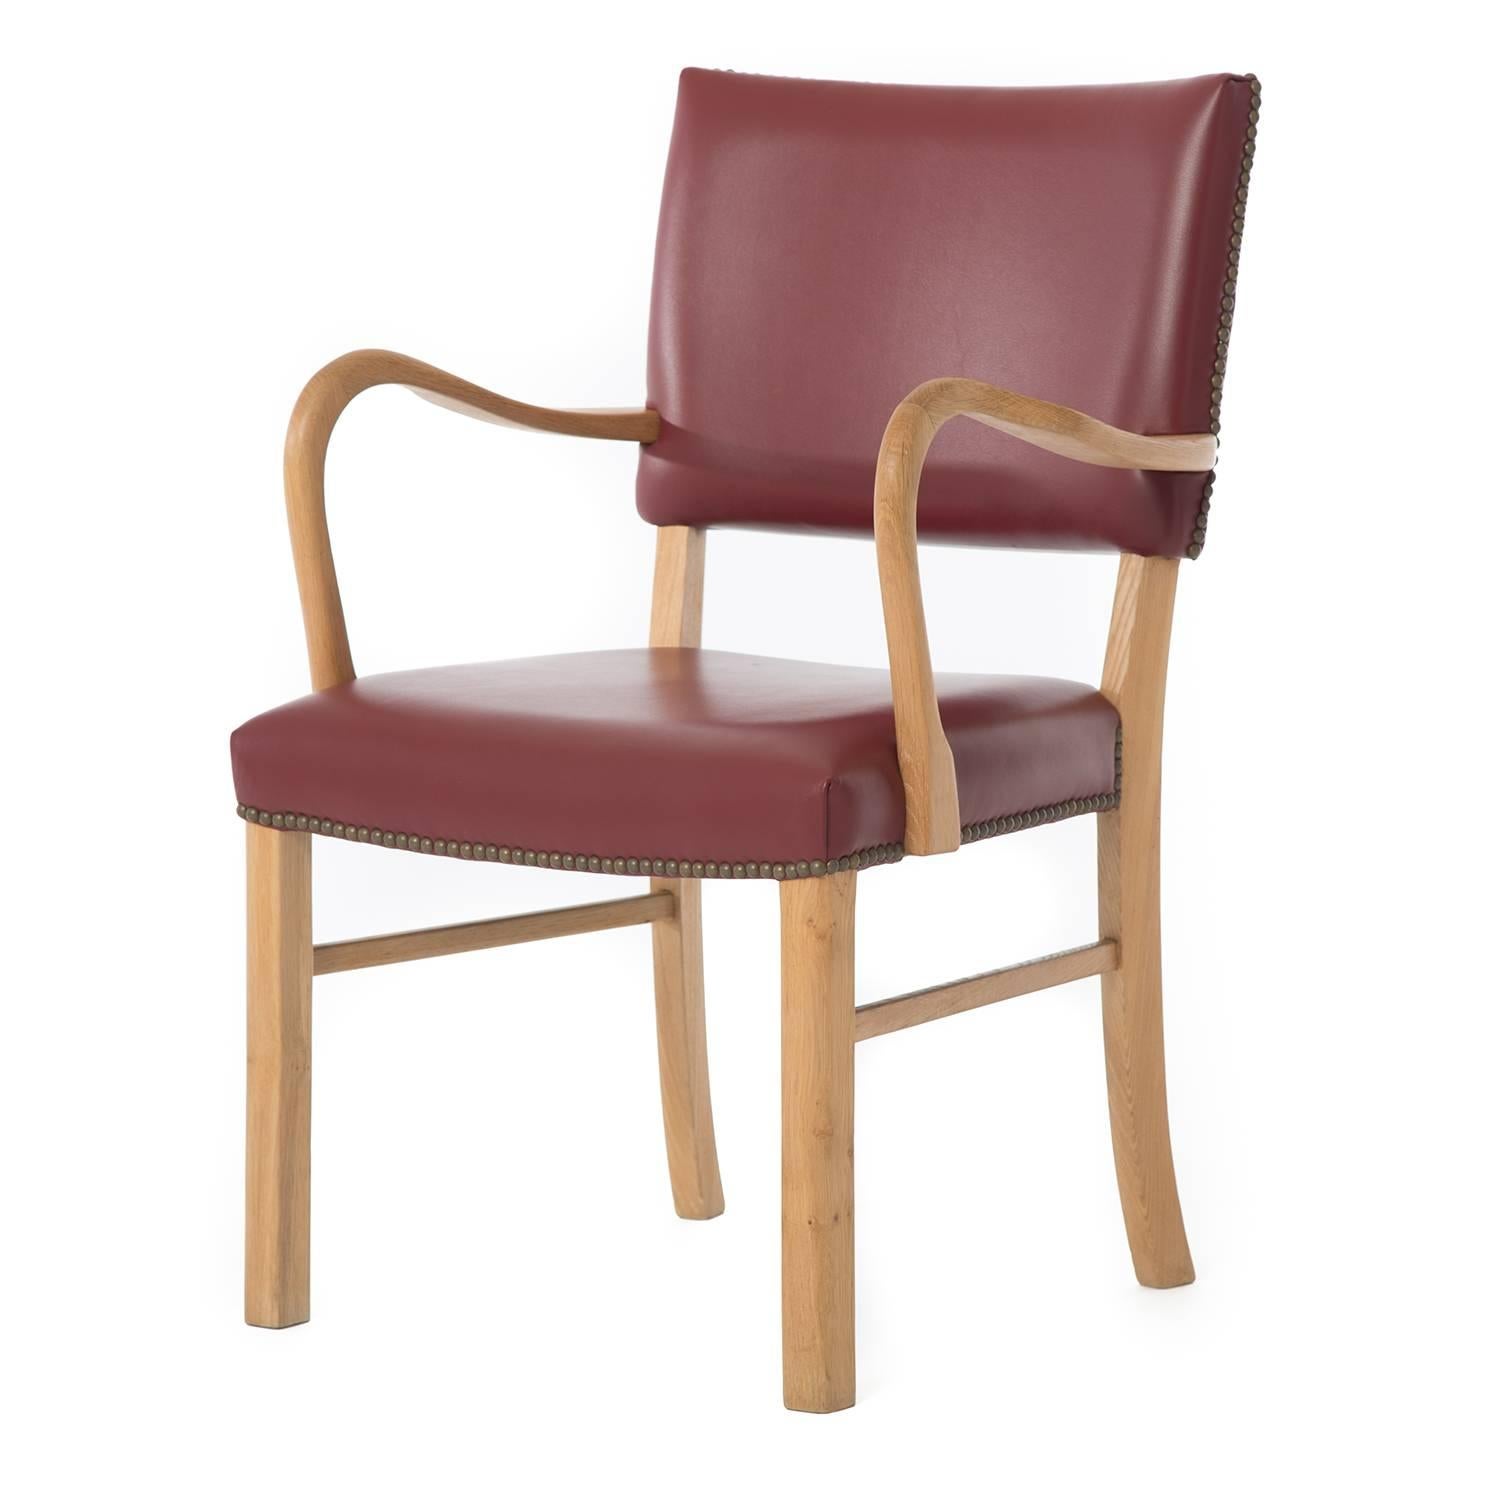 This occasional chair has beautiful bentwood arms that has a look of elegance when viewed from the side. Finished in white oak and leather. 

Professional, skilled furniture restoration is an integral part of what we do every day. Our goal is to